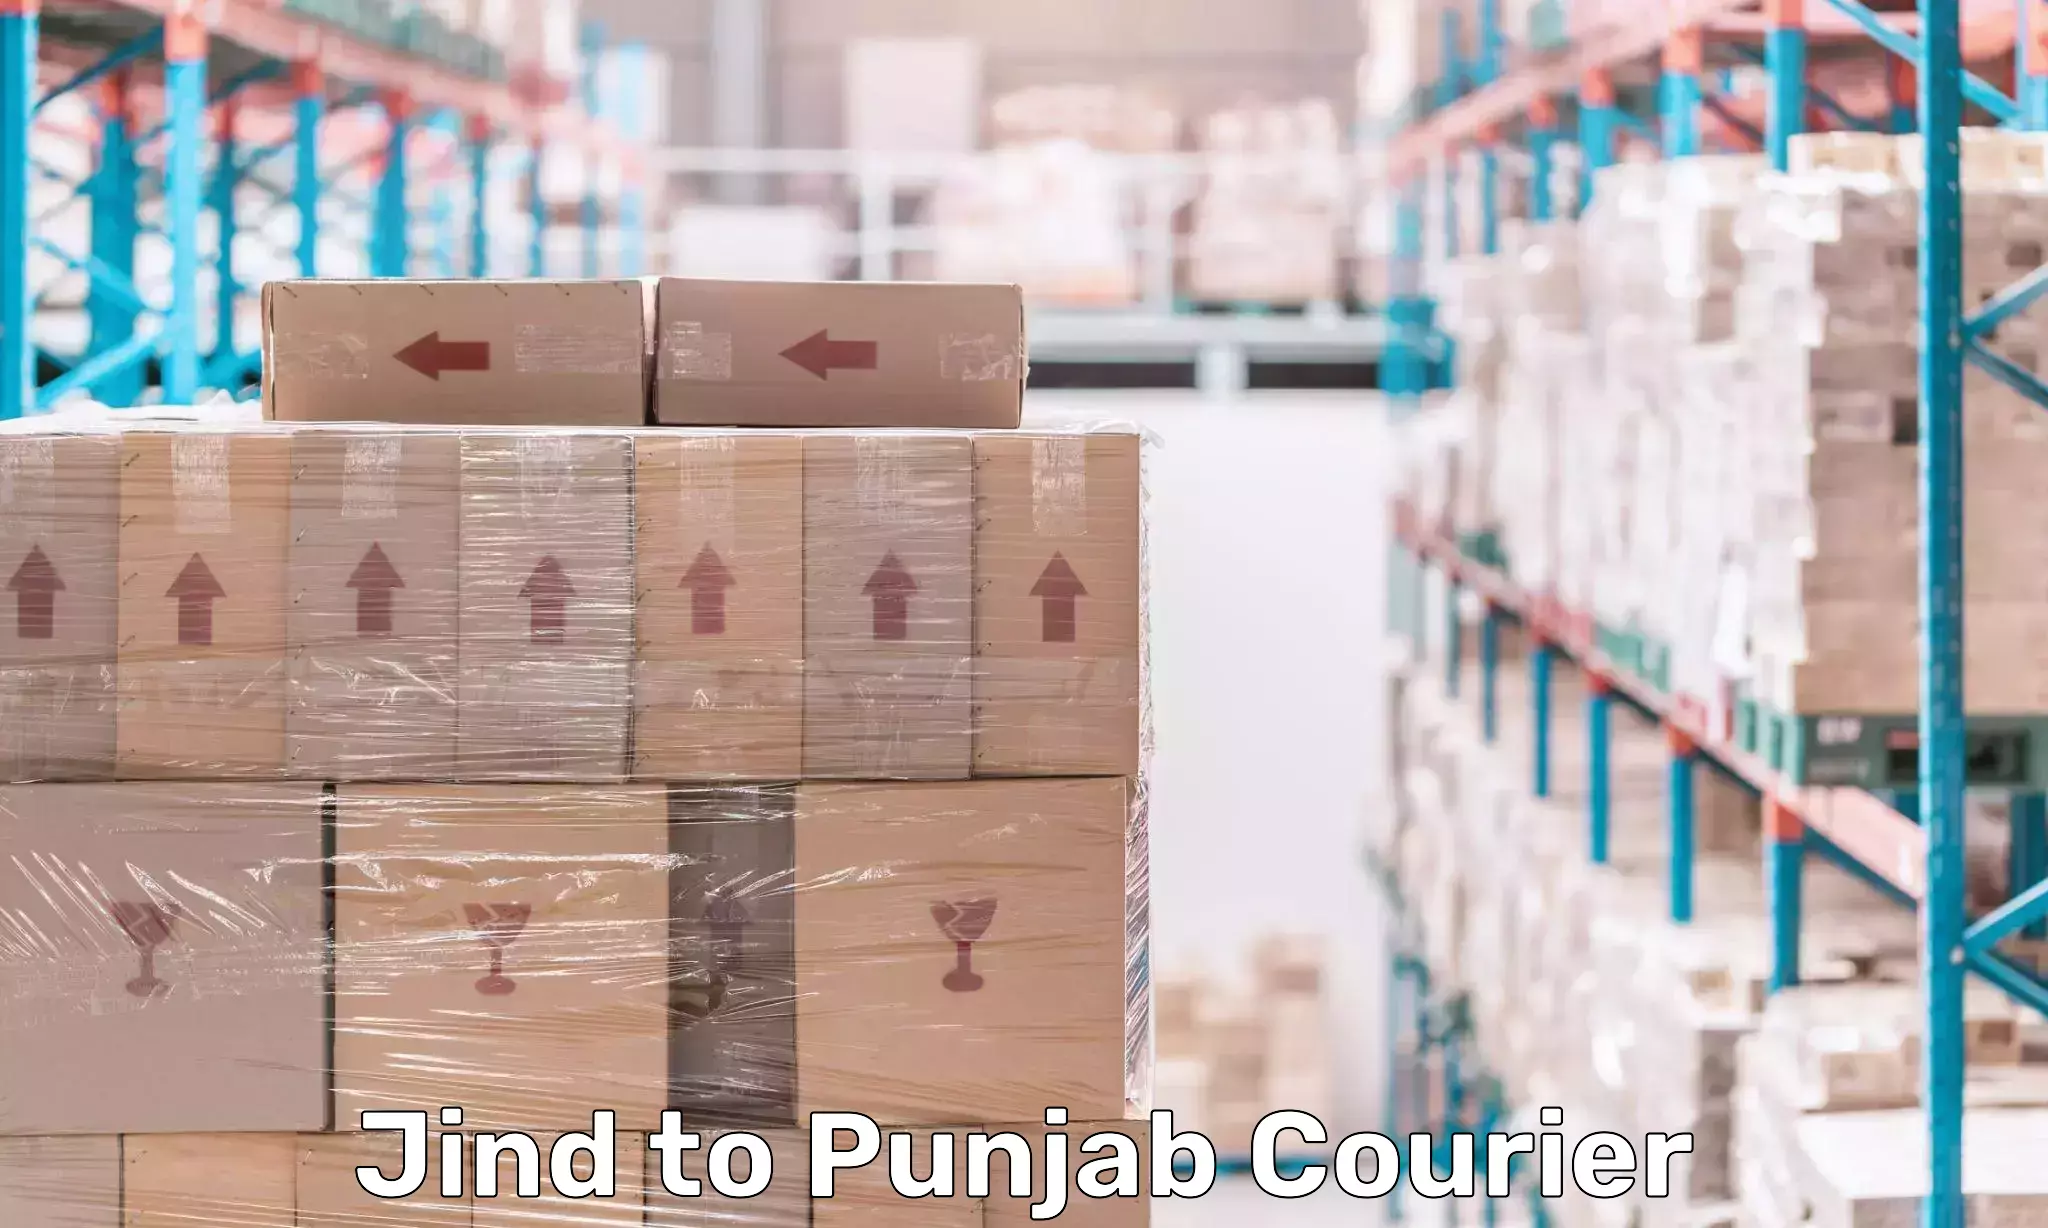 Sustainable shipping practices Jind to Rajpura